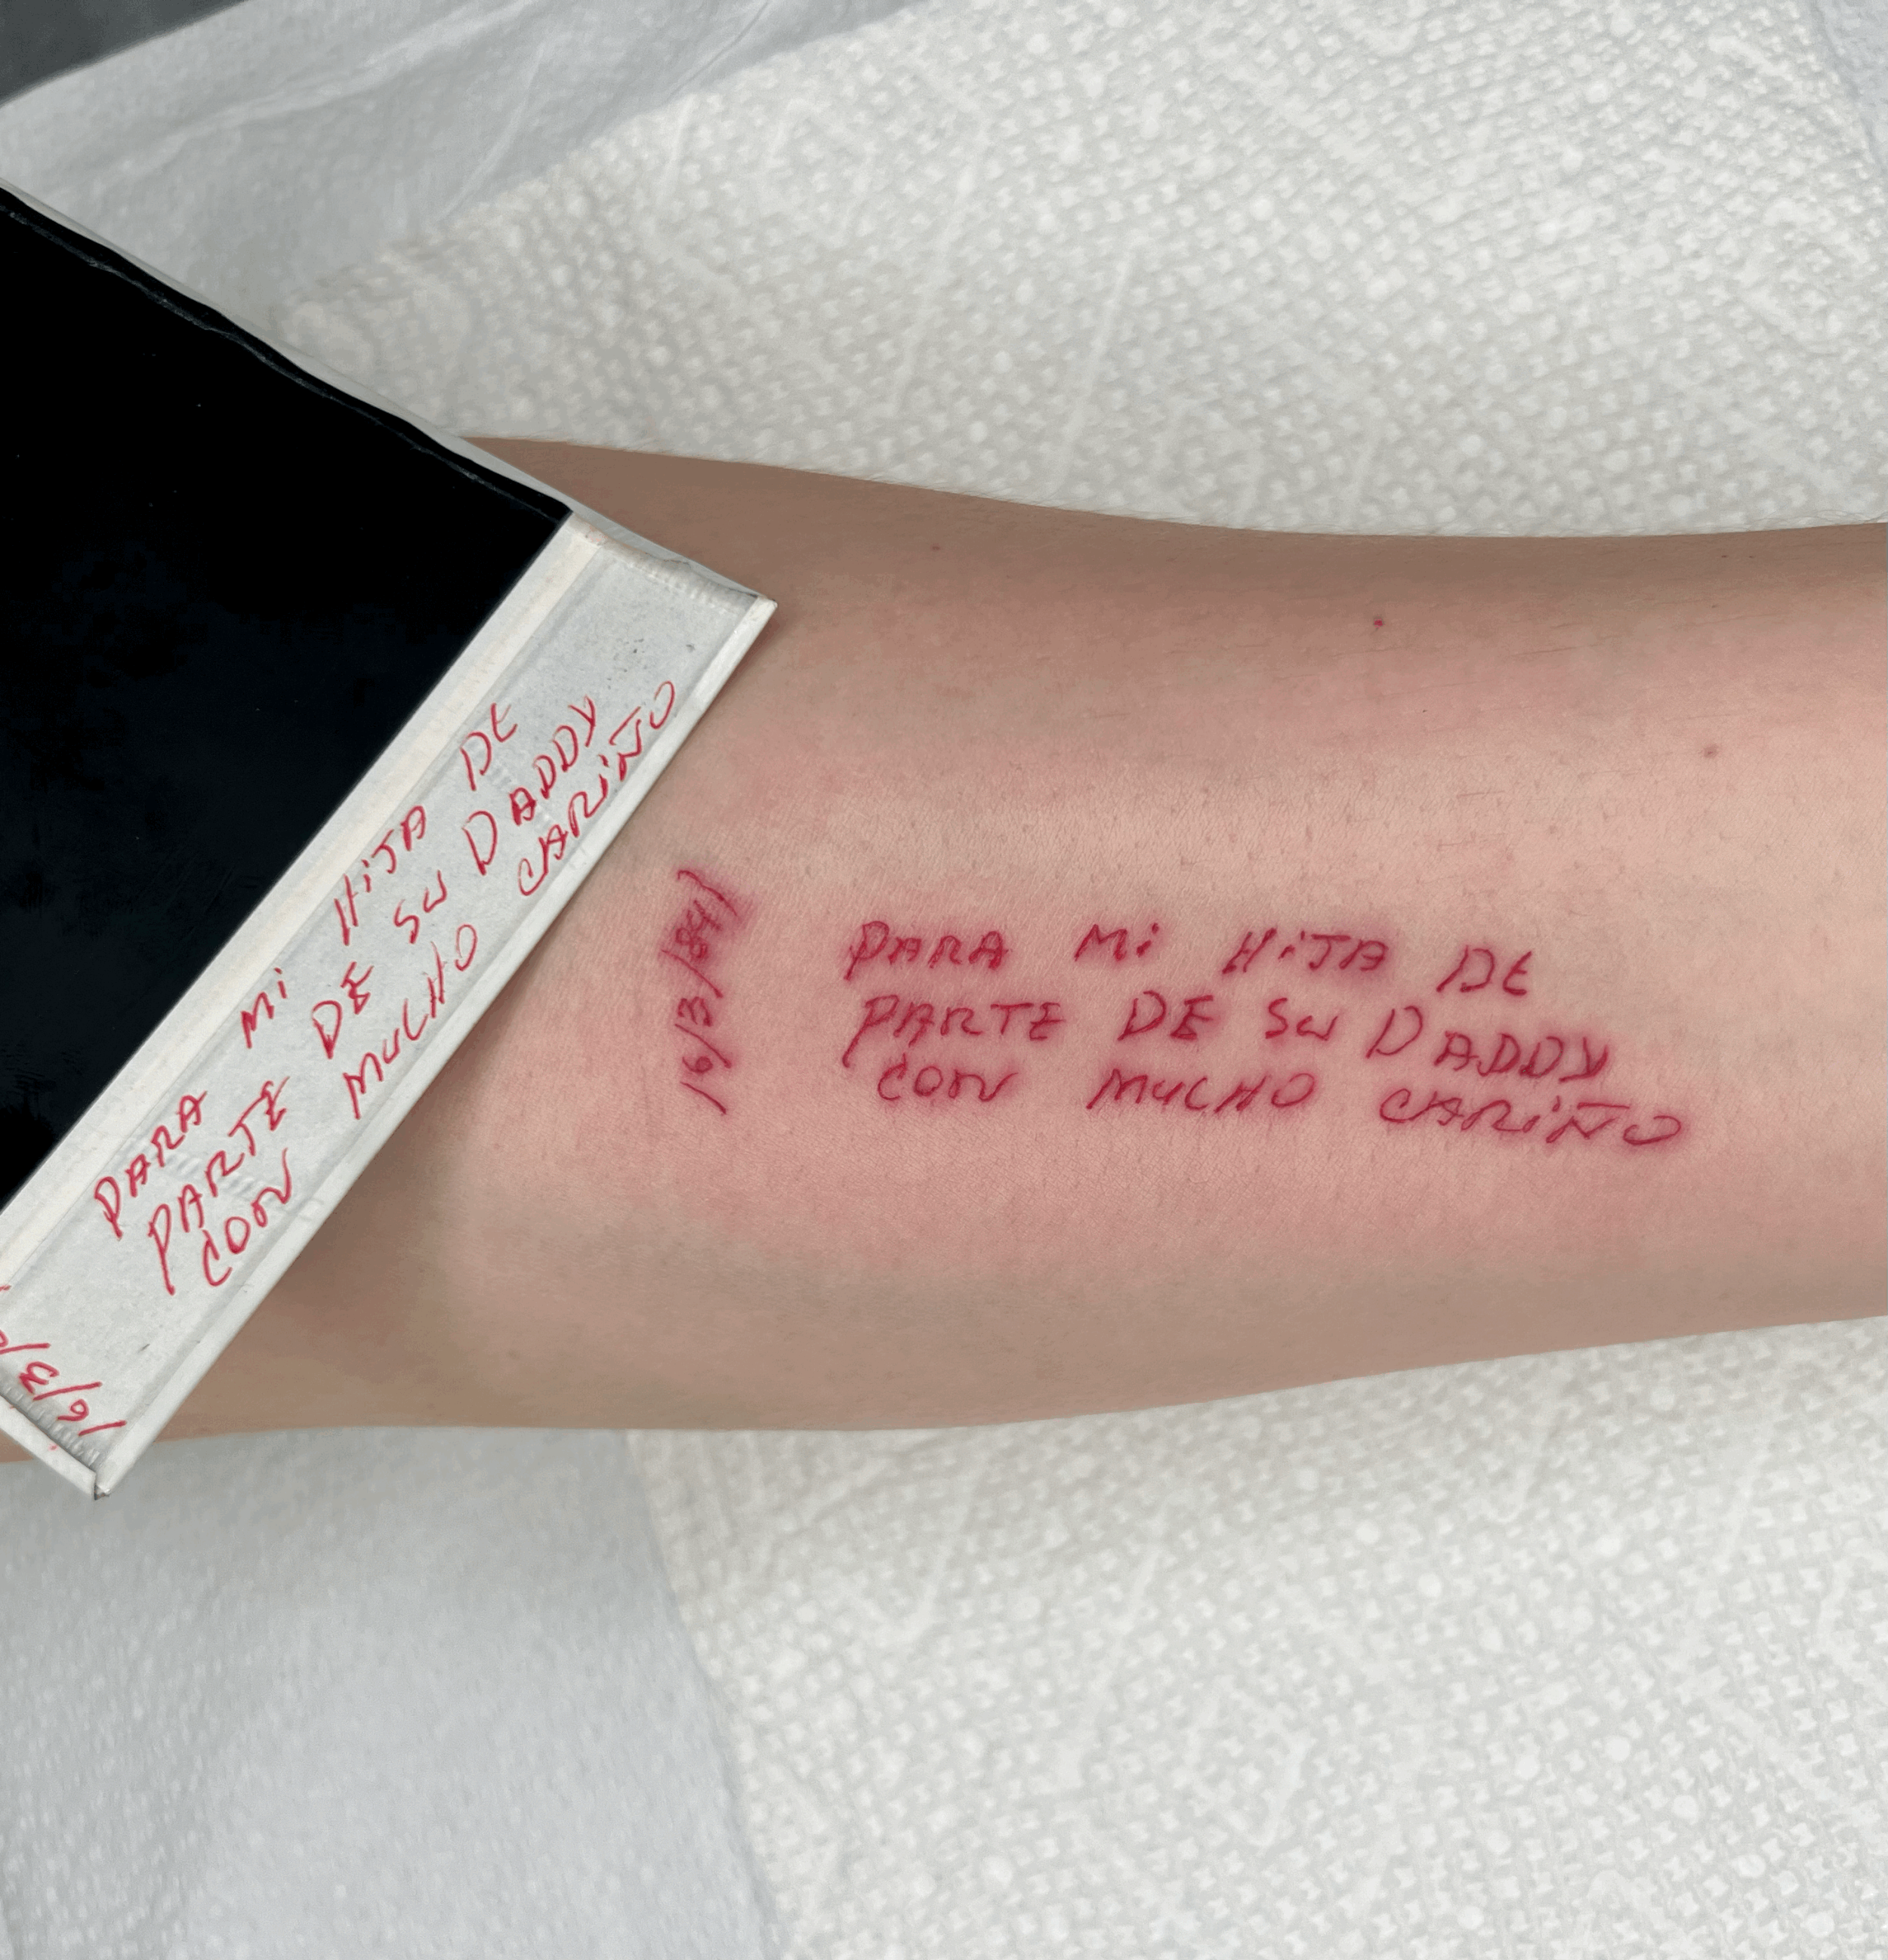  red ink tattoo of Spanish language handwriting from an old polaroid photo. Done on the forearm of a beige skin toned person.  